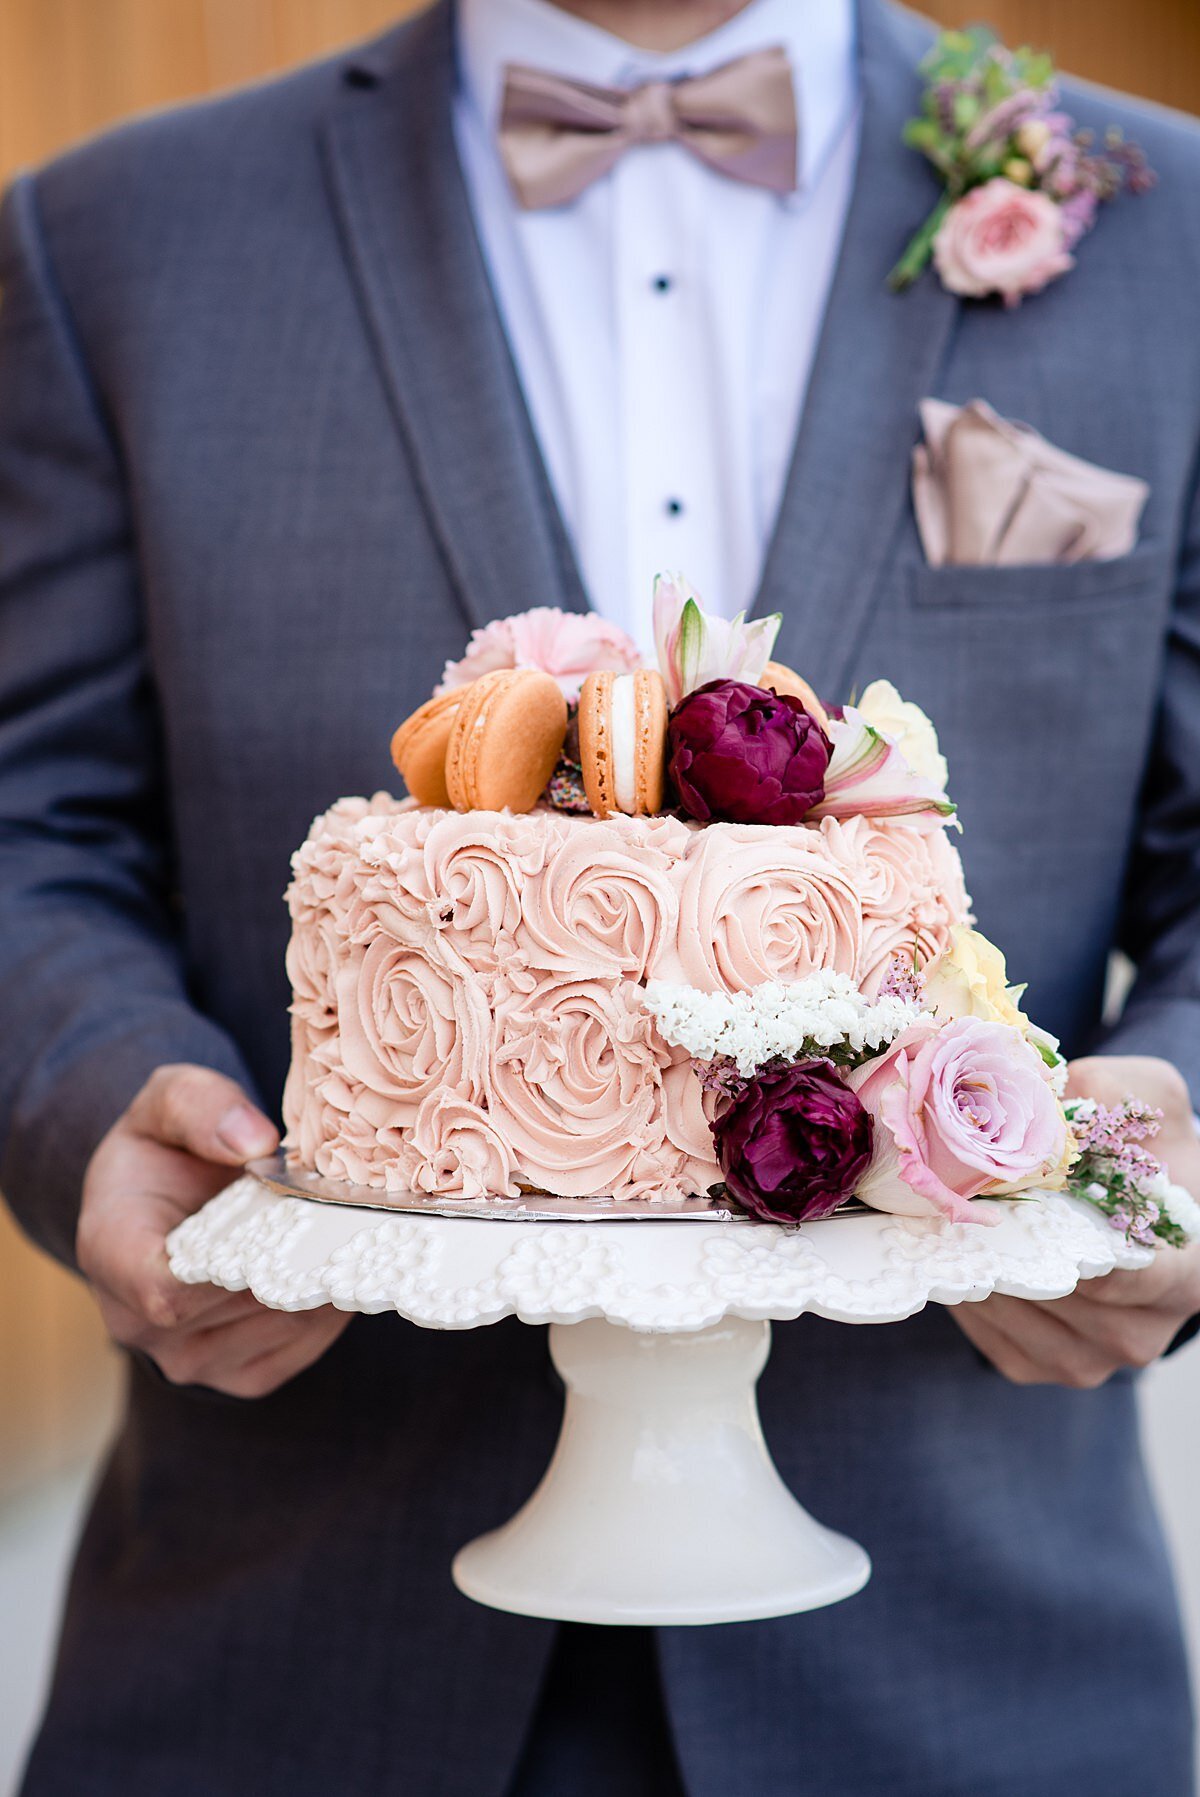 Blush one tier wedding cake with rosette icing. Topped with orange macarons, small peonies and roses. The cake is on a white footed cake stand being held by the groom who is wearing a dark blue suit, white shirt and light brown bowtie. He has a boutonniere of blush flowers to match his pocket square.